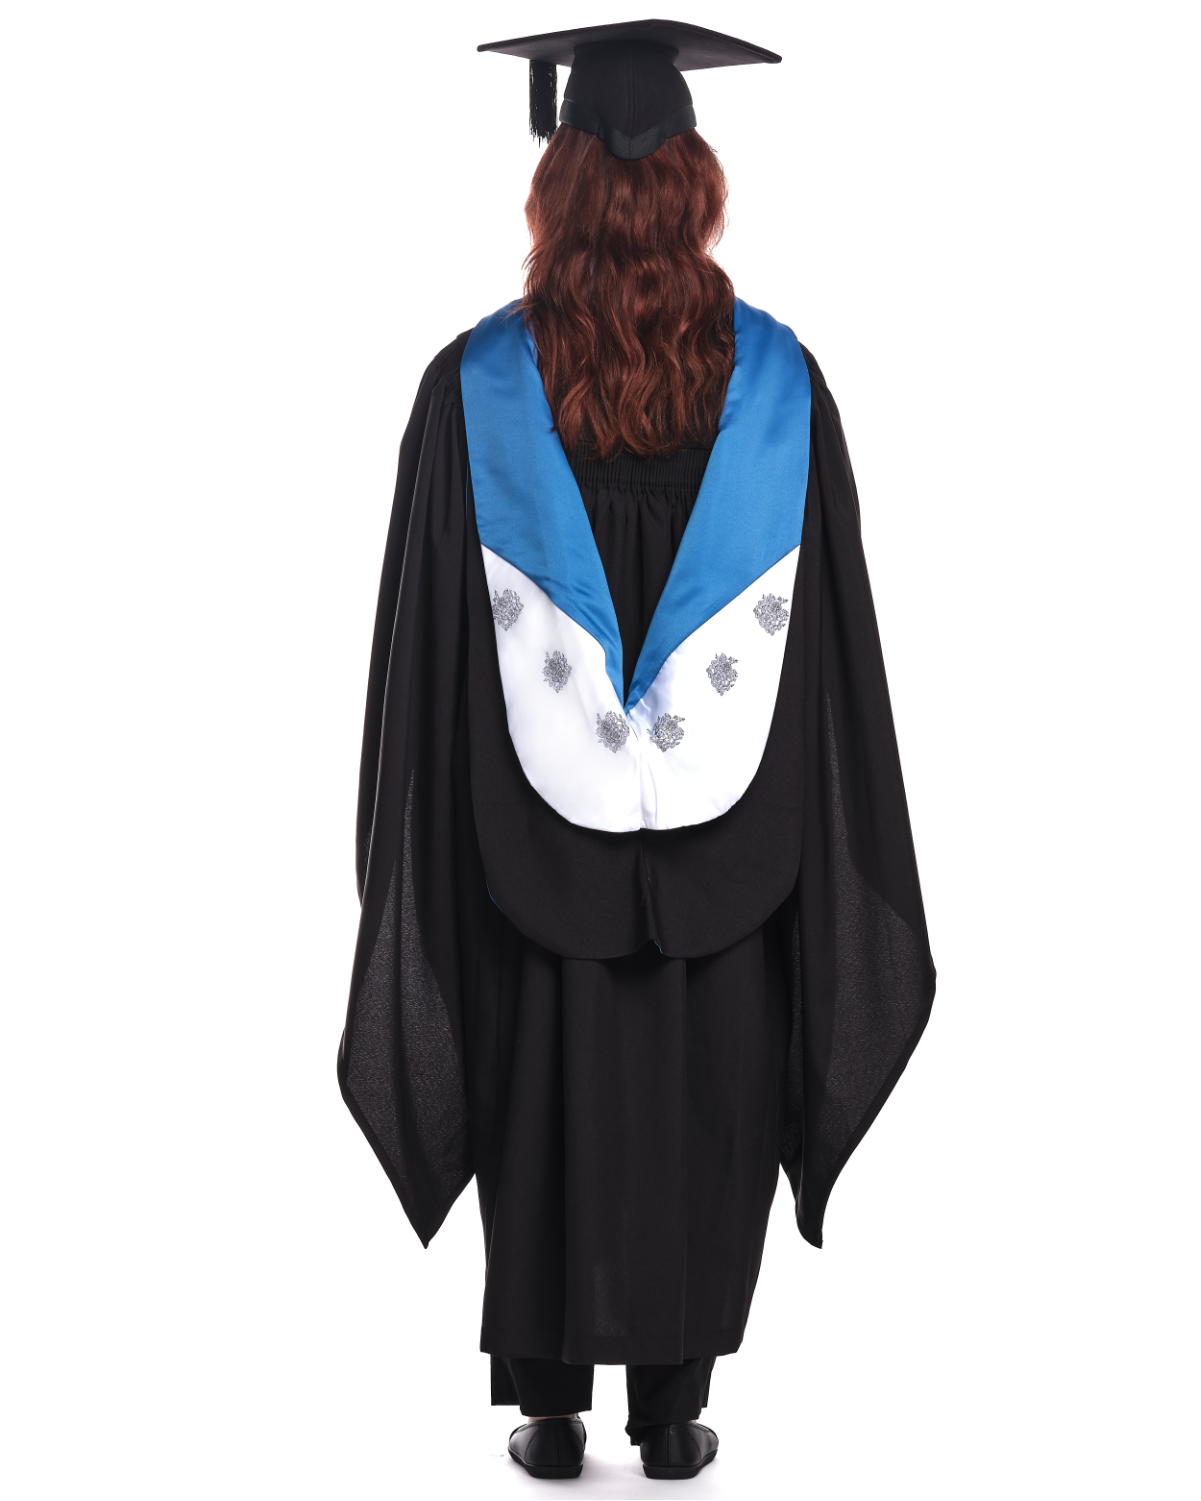 University of Northampton | BSc | Bachelor of Science Gown, Cap and Hood Set